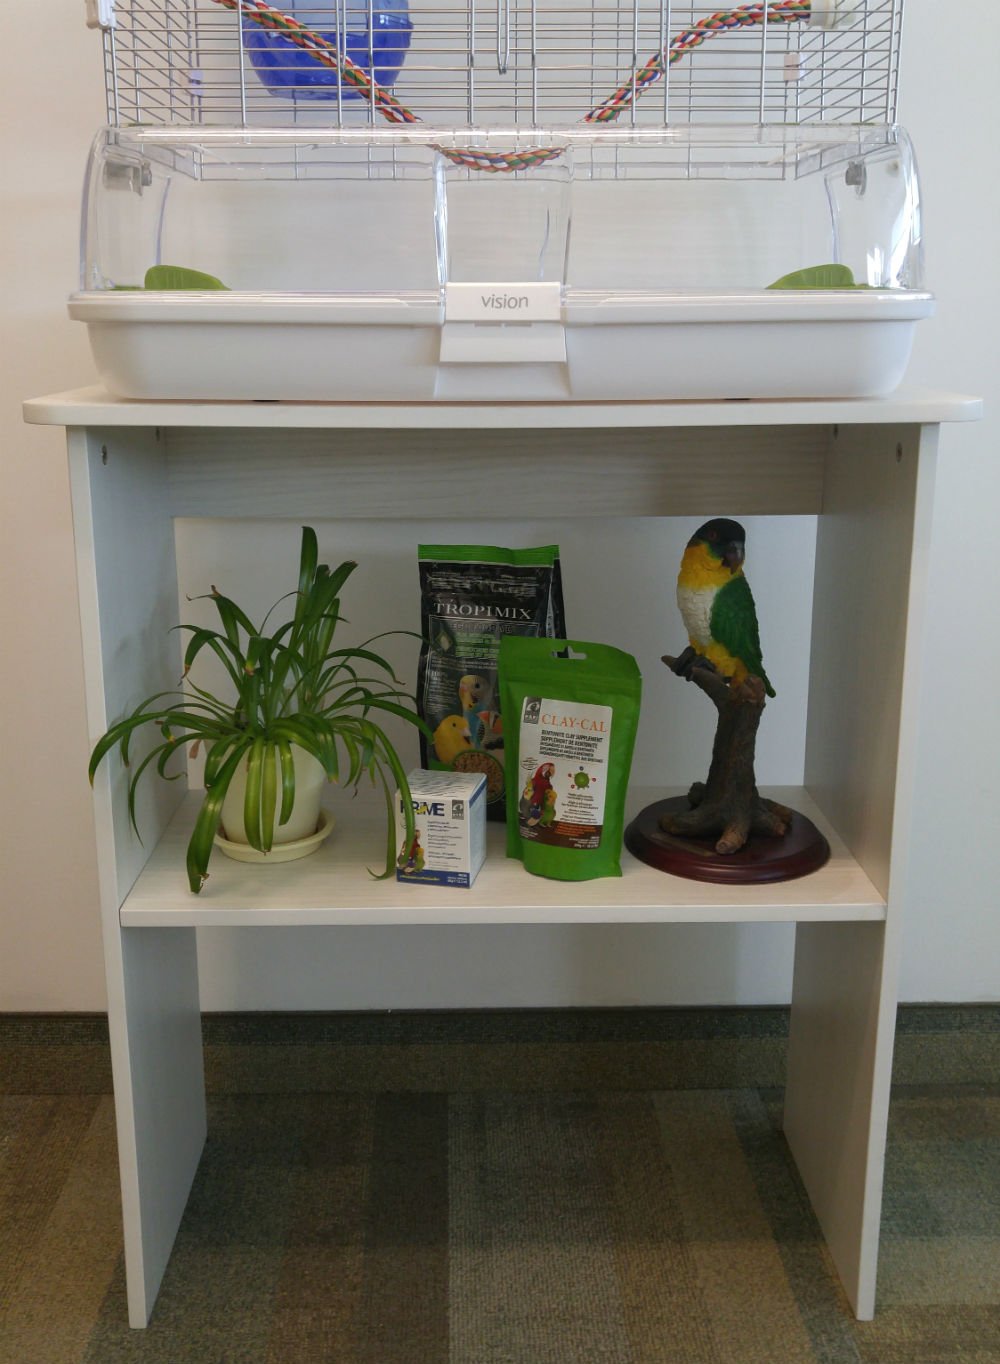 large budgie cage with stand